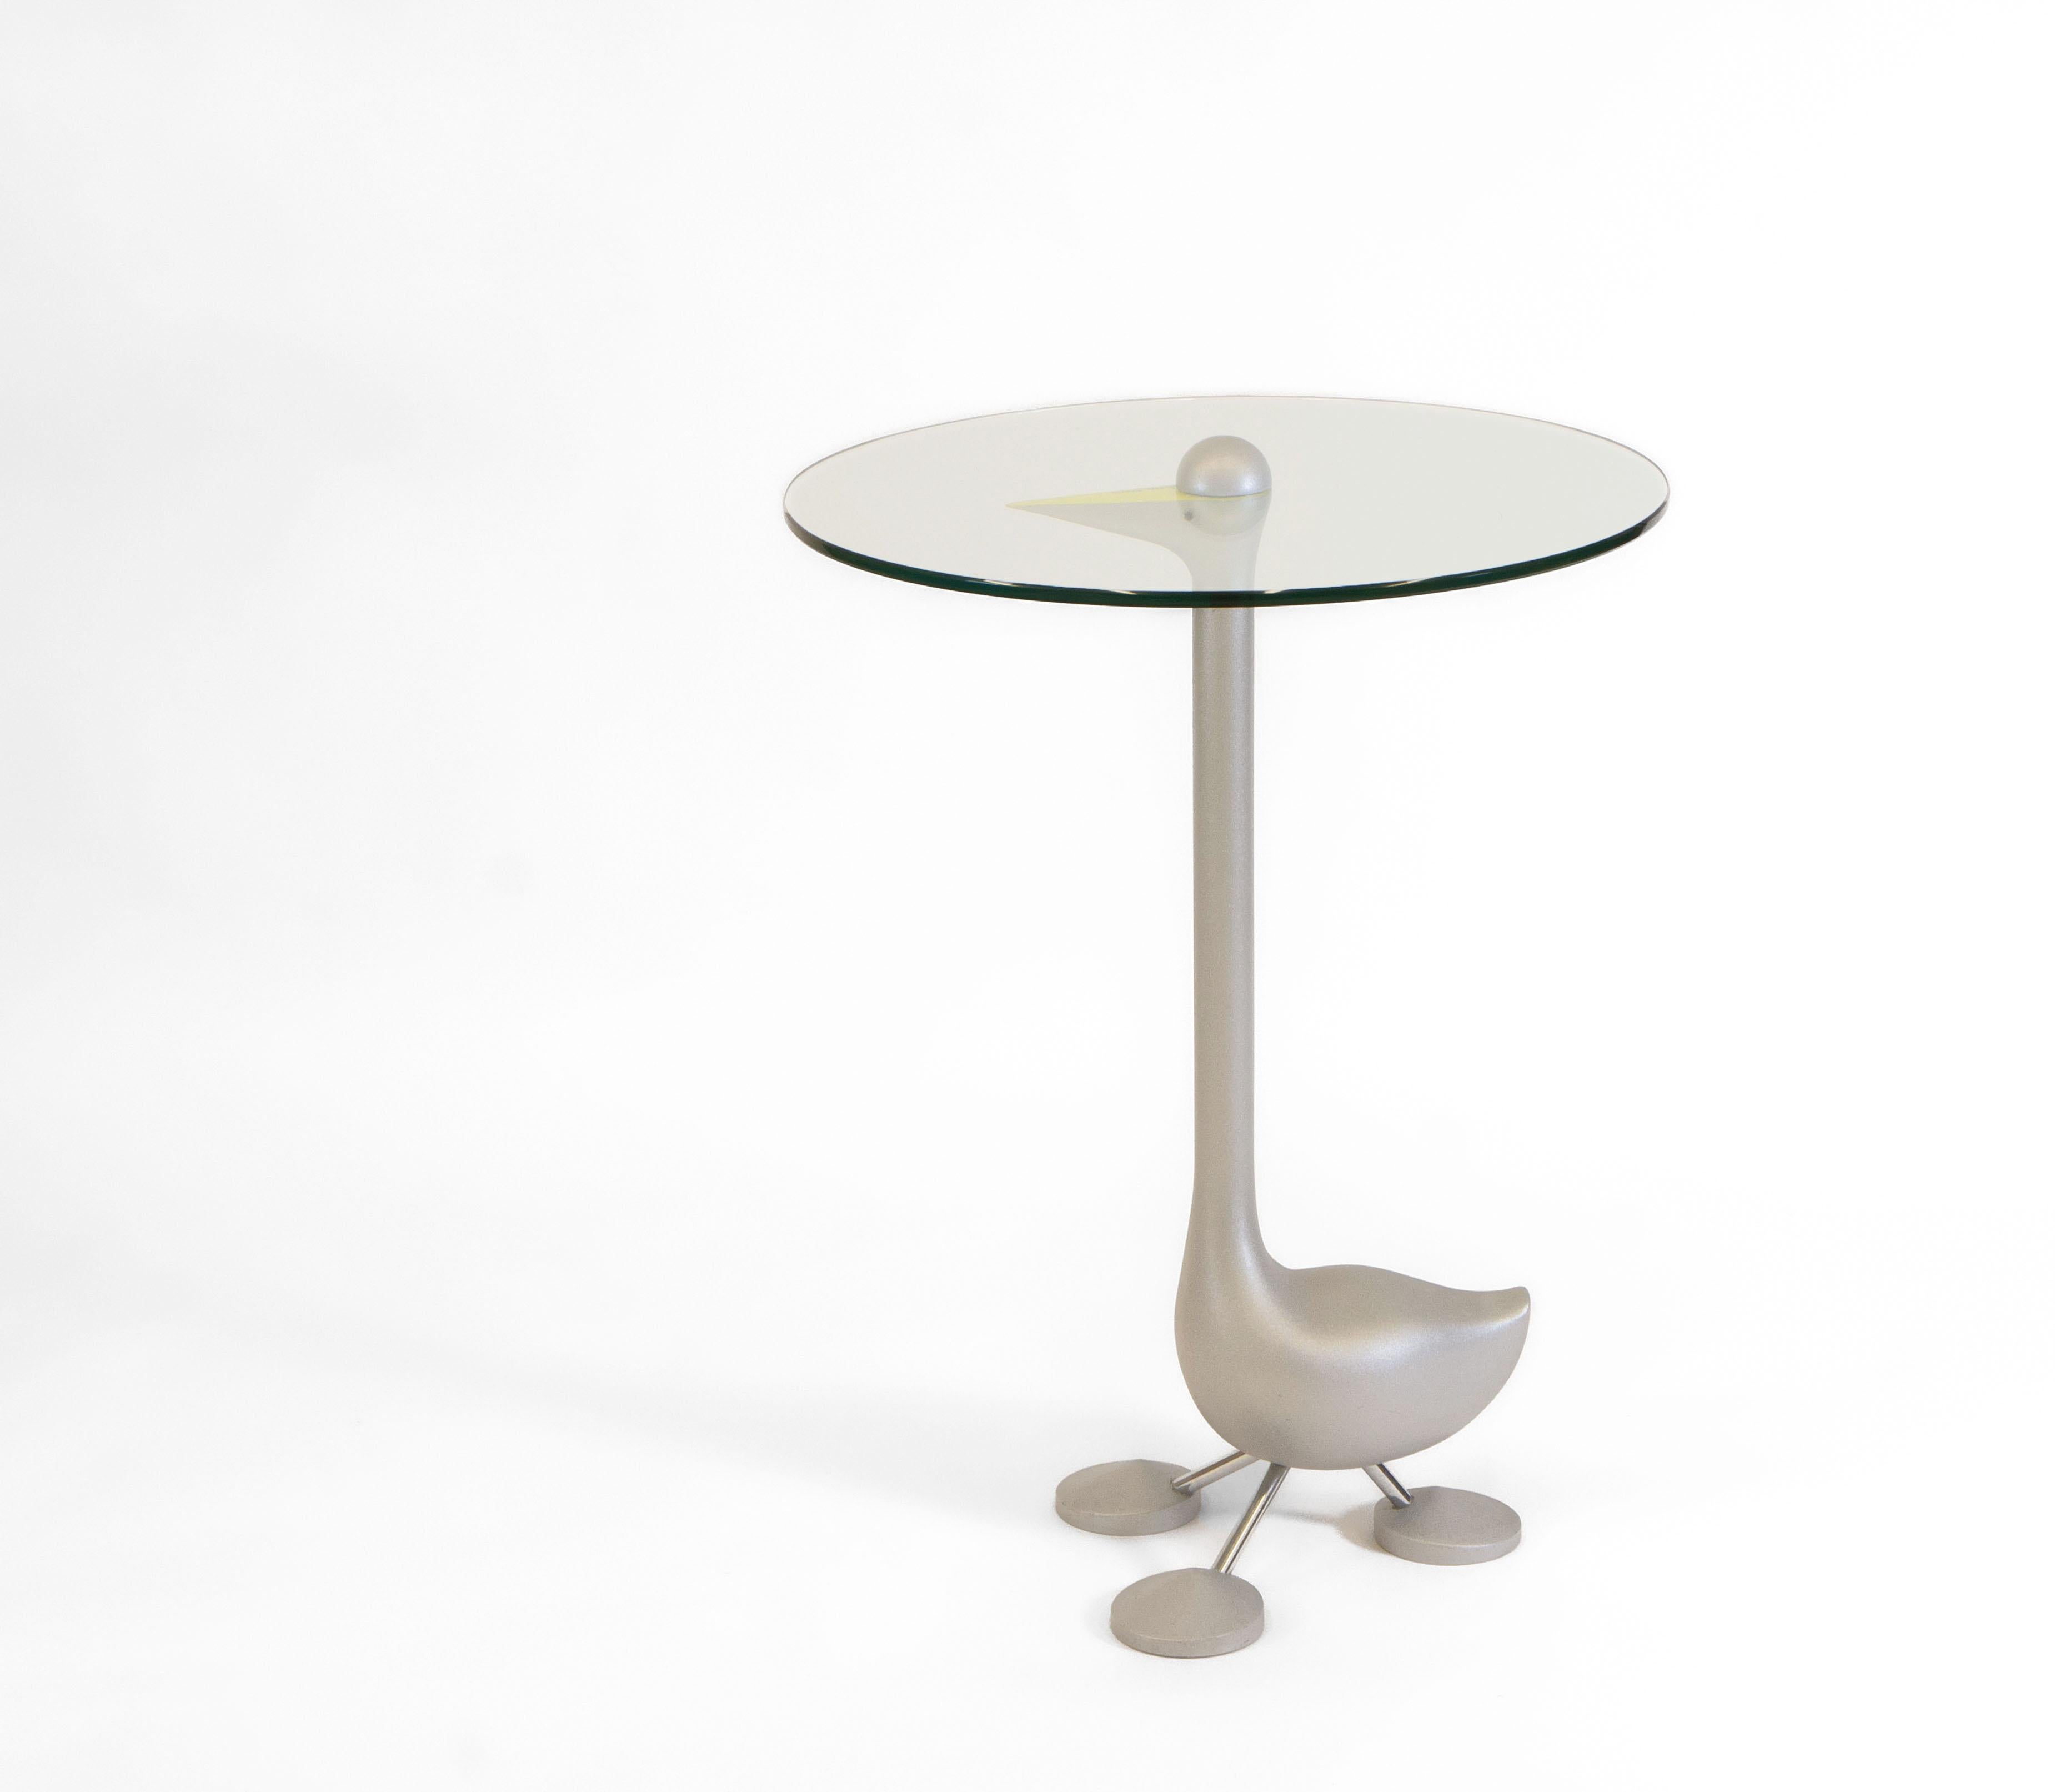 A signed Sirfo Goose Table designed by Alessandro Mendini (1931- 2019) in 1986 for Zanotta Edizioni. circa 1980s.

The frame is sandblasted cast aluminium, with a yellow painted beak. The clear glass is tempered and 6mm thick.

Intended as works